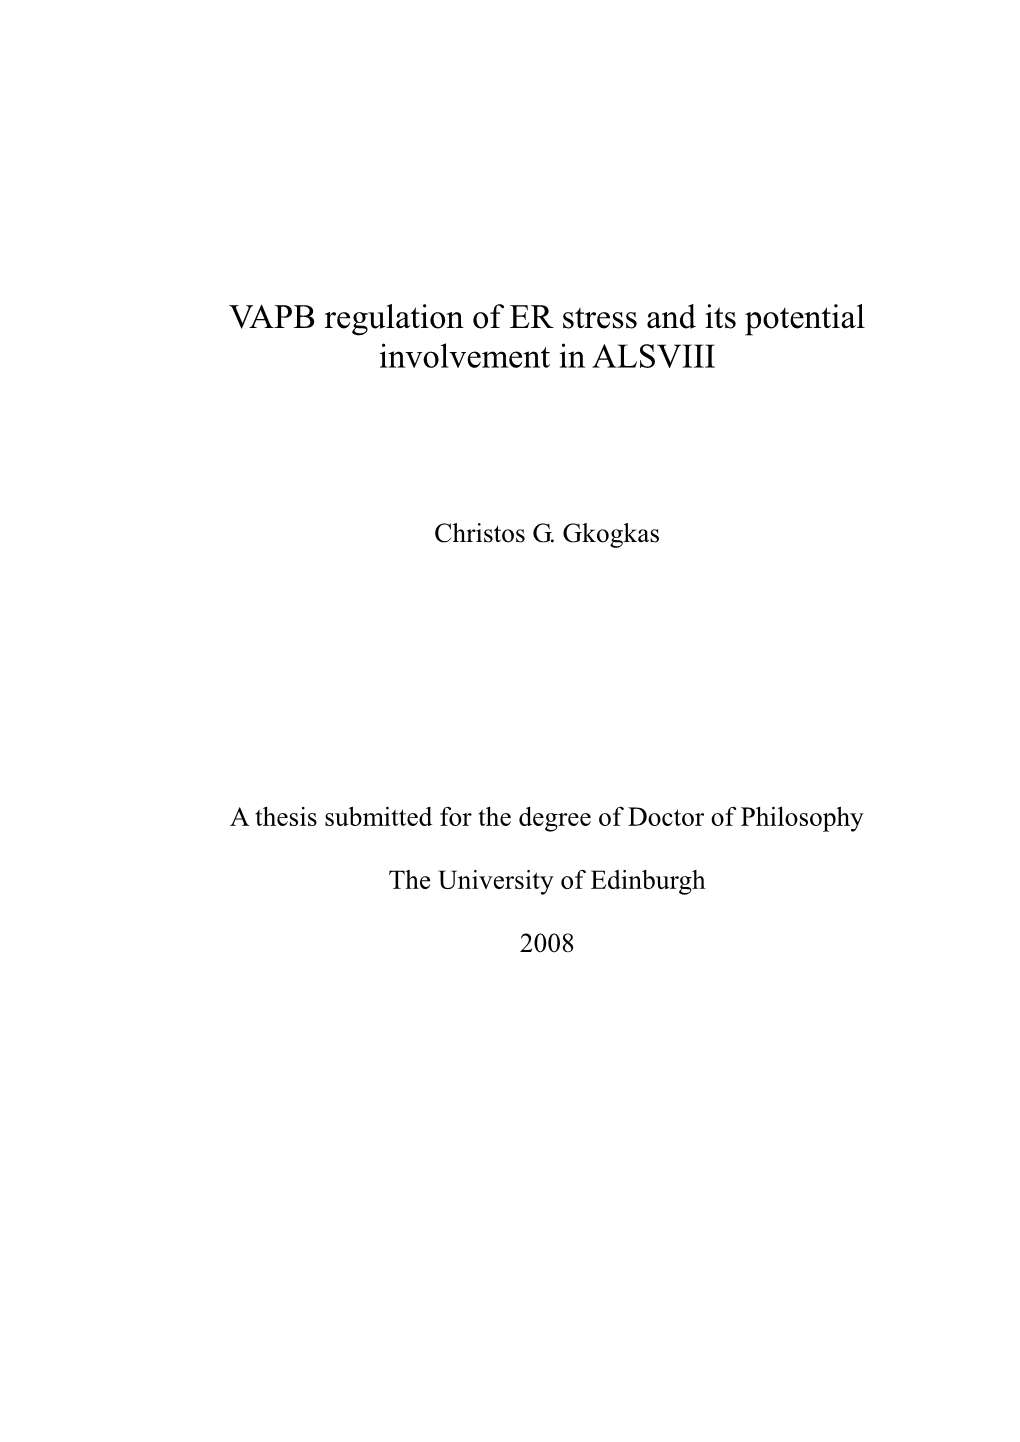 VAPB Regulation of ER Stress and Its Potential Involvement in ALSVIII